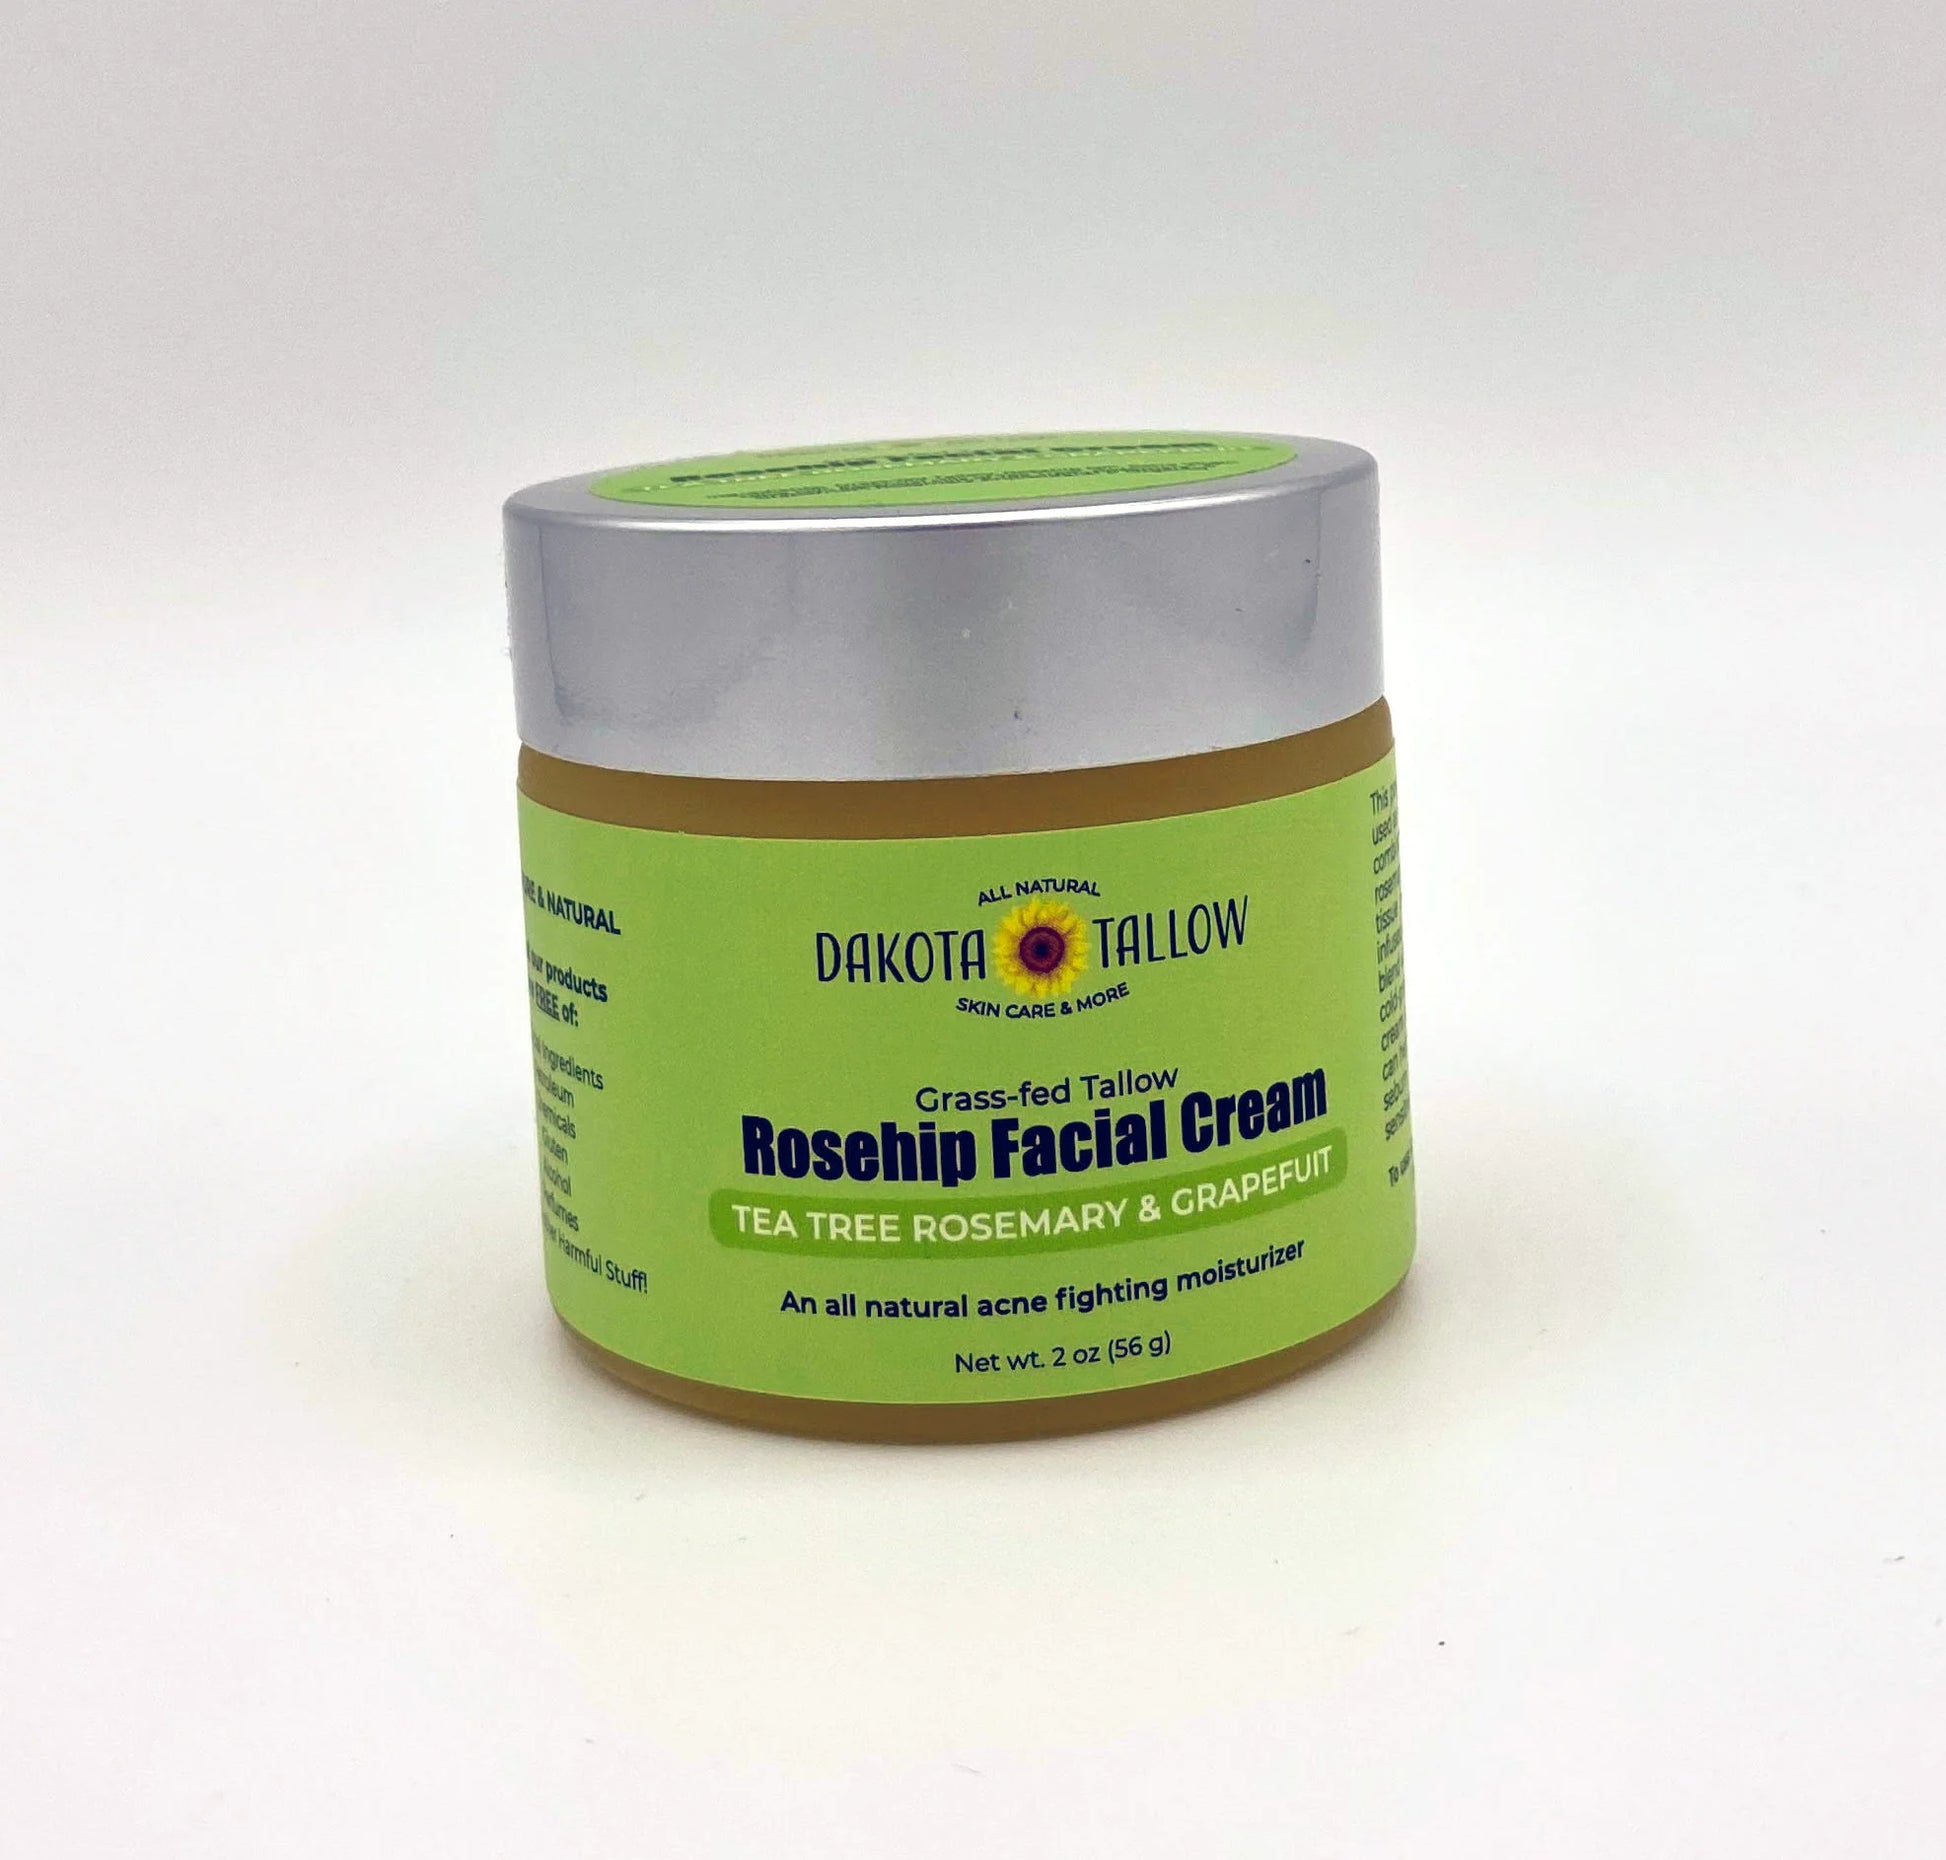 All Natural Grass-fed Tallow Rosehip Facial Cream blended with organic Tea Tree, Rosemary and Grapefruit essential oils!